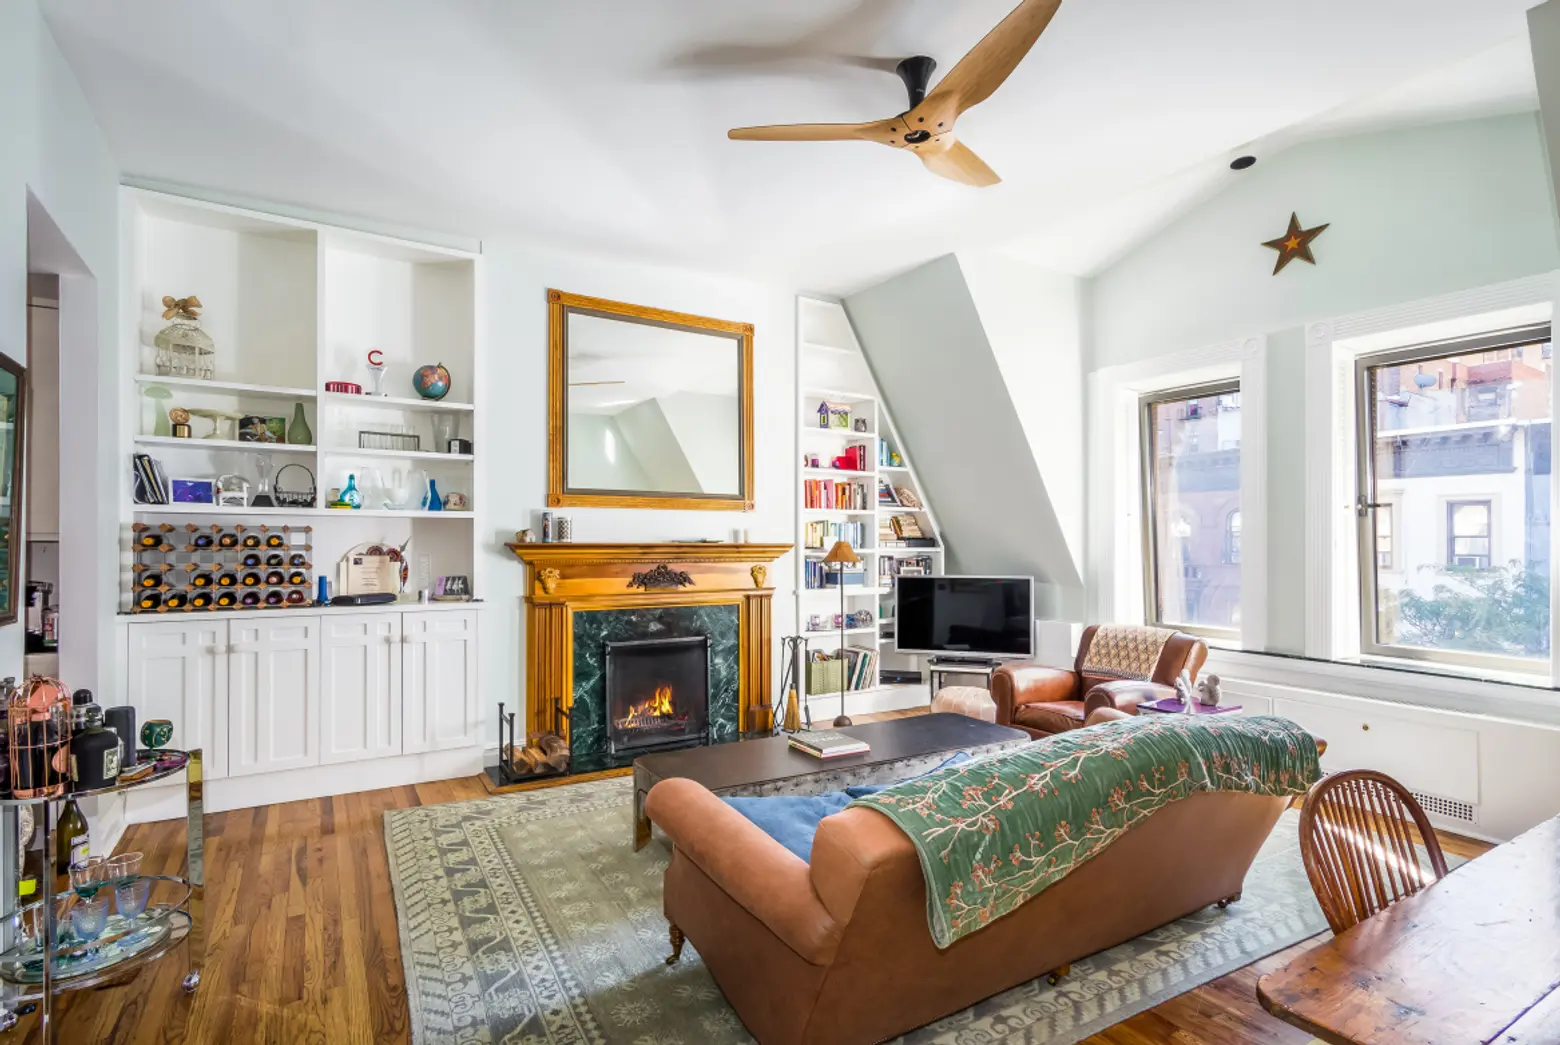 Amy Schumer’s Lovely Upper West Side Co-op Lists for $2M